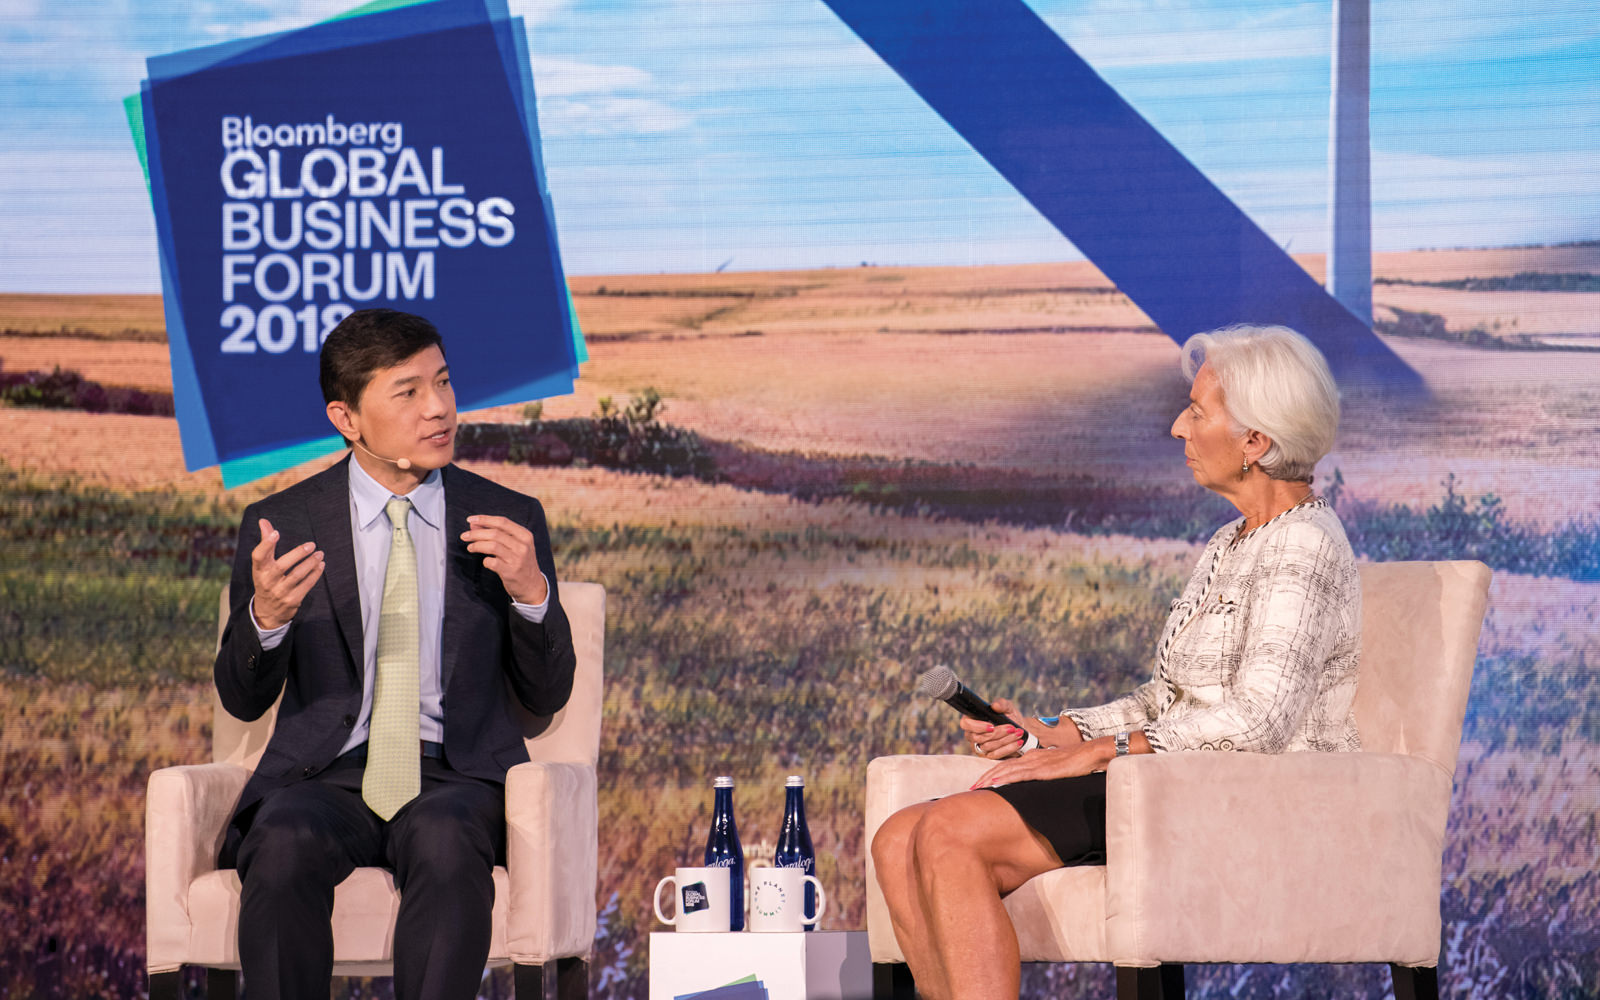 Robin Li, CEO of Baidu, and Christine Lagarde, Managing Director of the International Monetary Fund, discuss how technology impacts economic growth at the Bloomberg Global Business Forum in New York City.